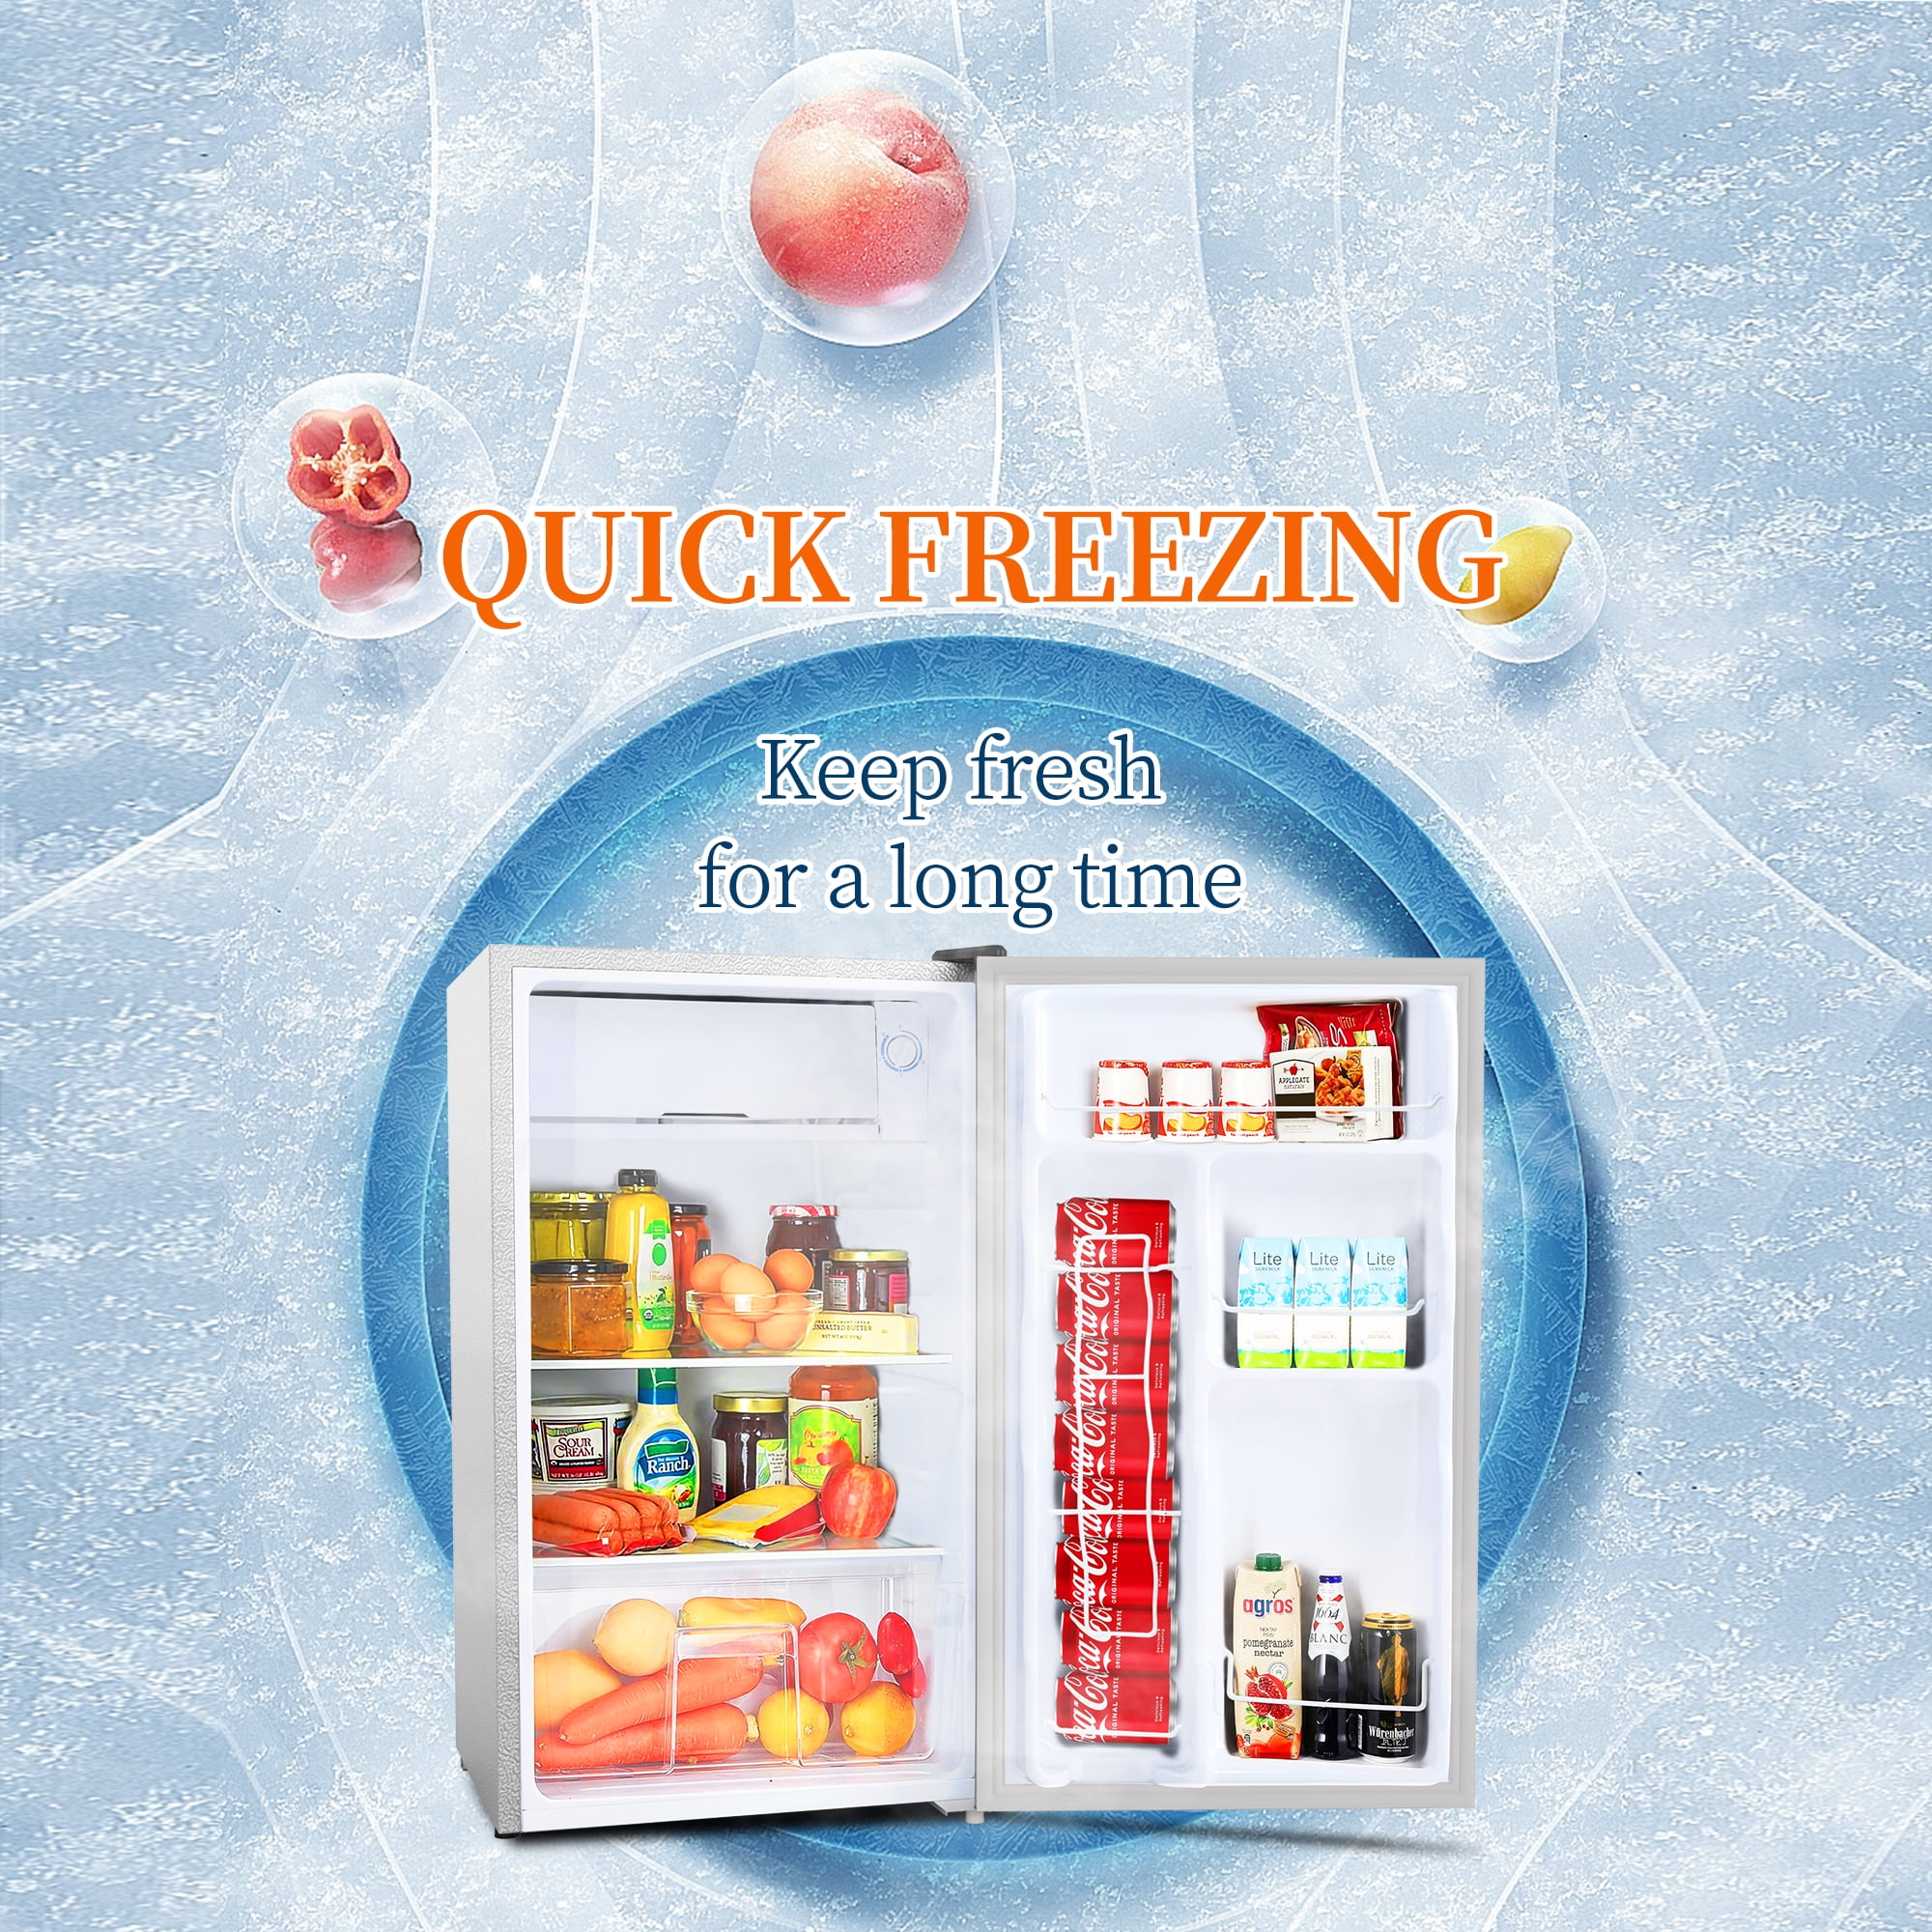 How to Maintain Fridges and Freezers